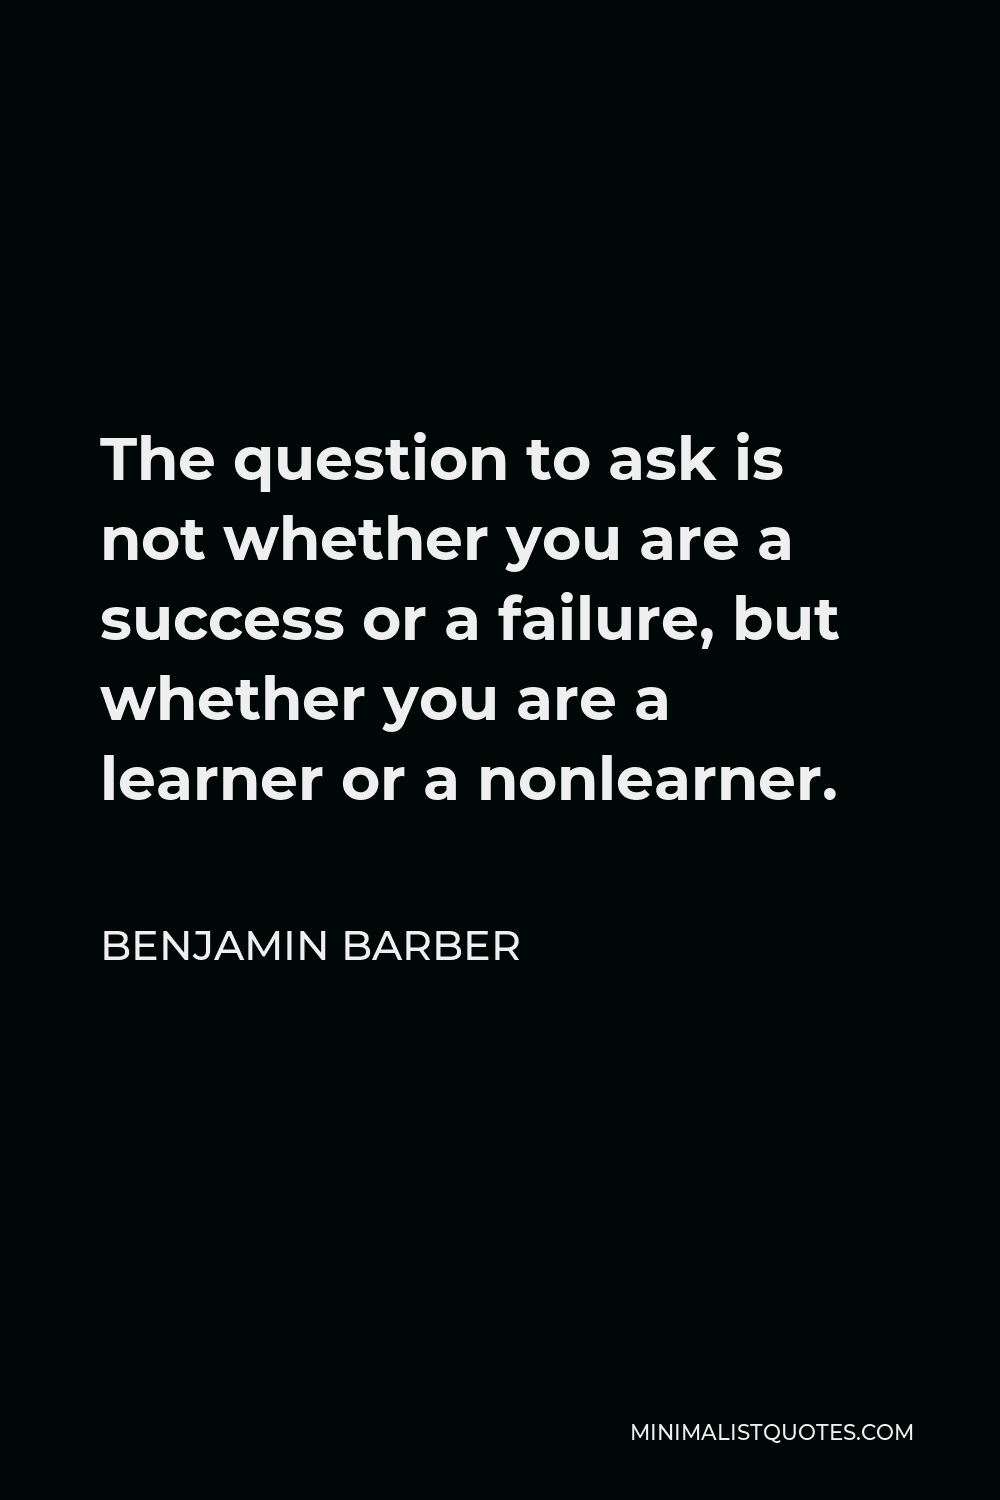 Benjamin Barber Quote - The question to ask is not whether you are a success or a failure, but whether you are a learner or a nonlearner.